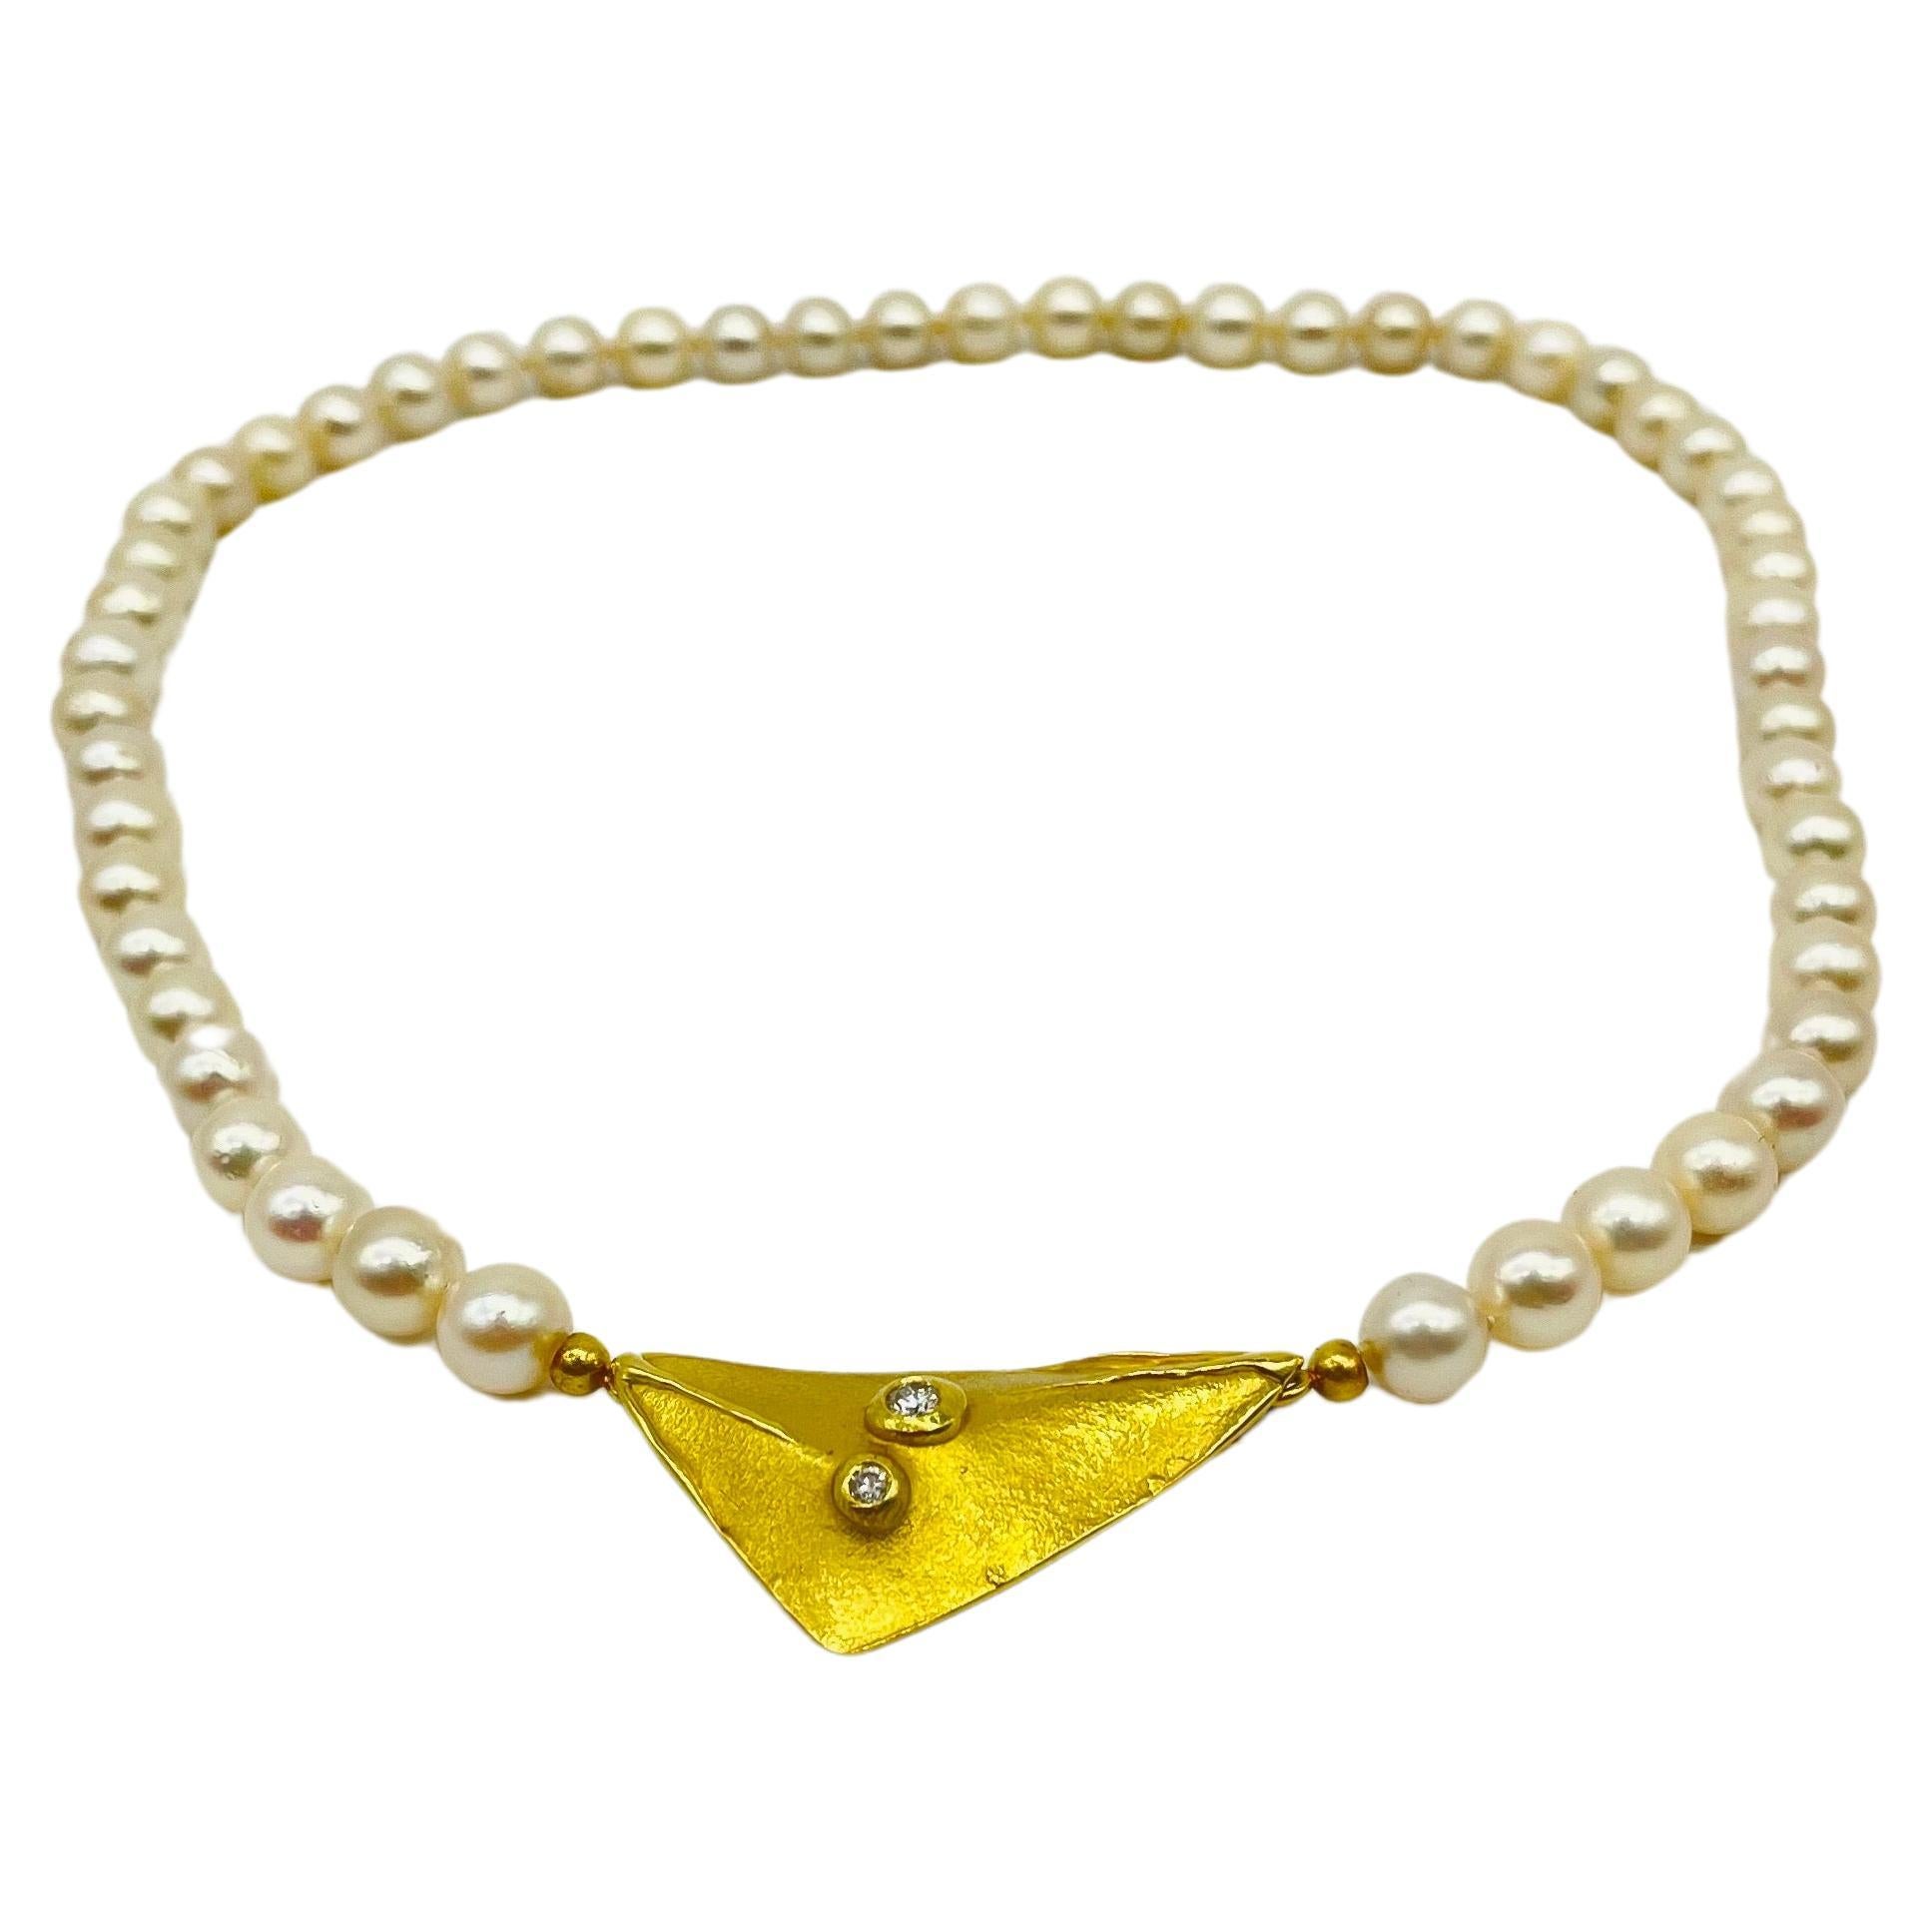 Immerse yourself in the dreamlike beauty of this exquisite and elegant pearl necklace, boasting pearls with a subtle champagne hue. The pearls exude a timeless charm, and as a pendant, this necklace features a gracefully offset triangular form. This